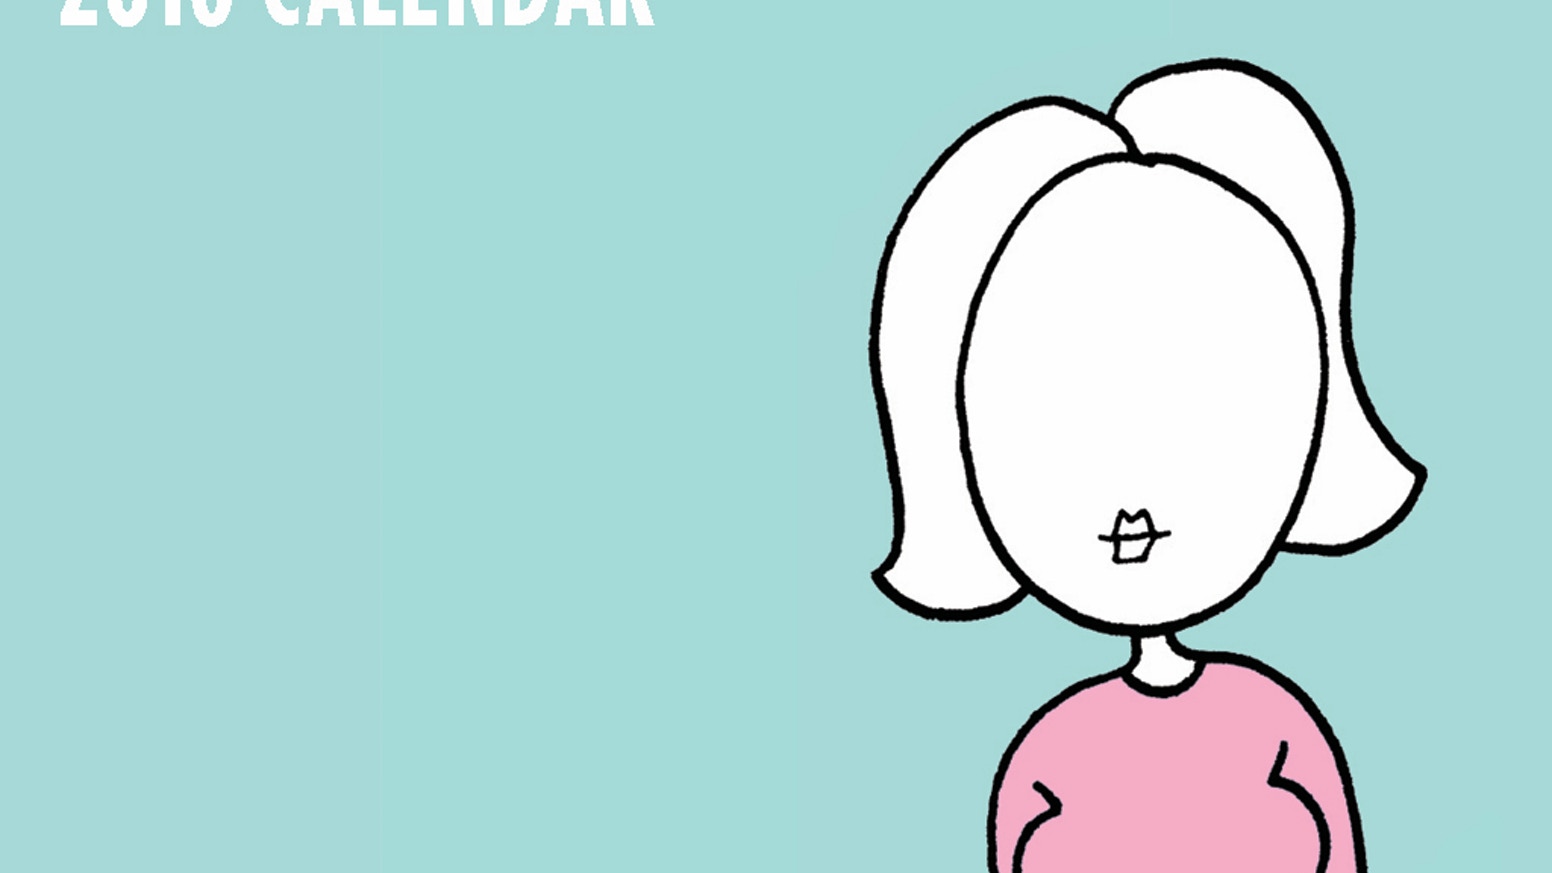 2016 Calendar by Everyday People Cartoons by Cathy Thorne.